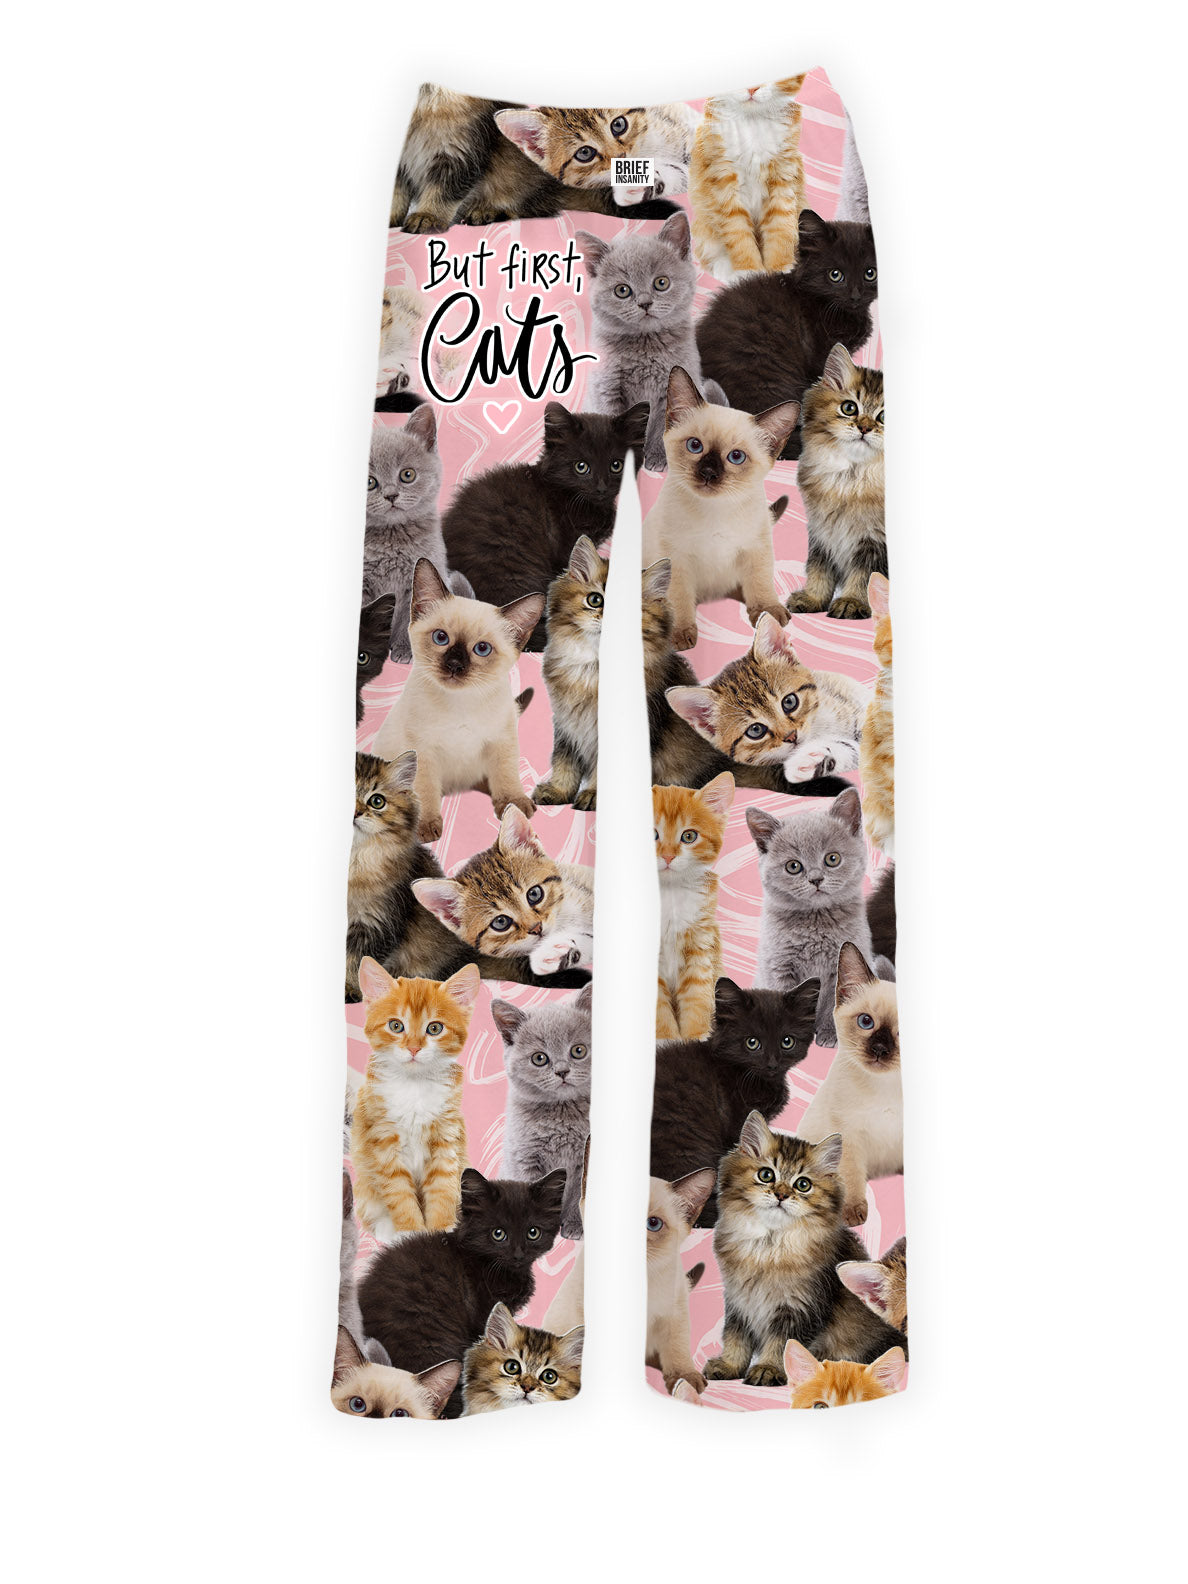 BRIEF INSANITY's But First Cats Pajama Lounge Pants